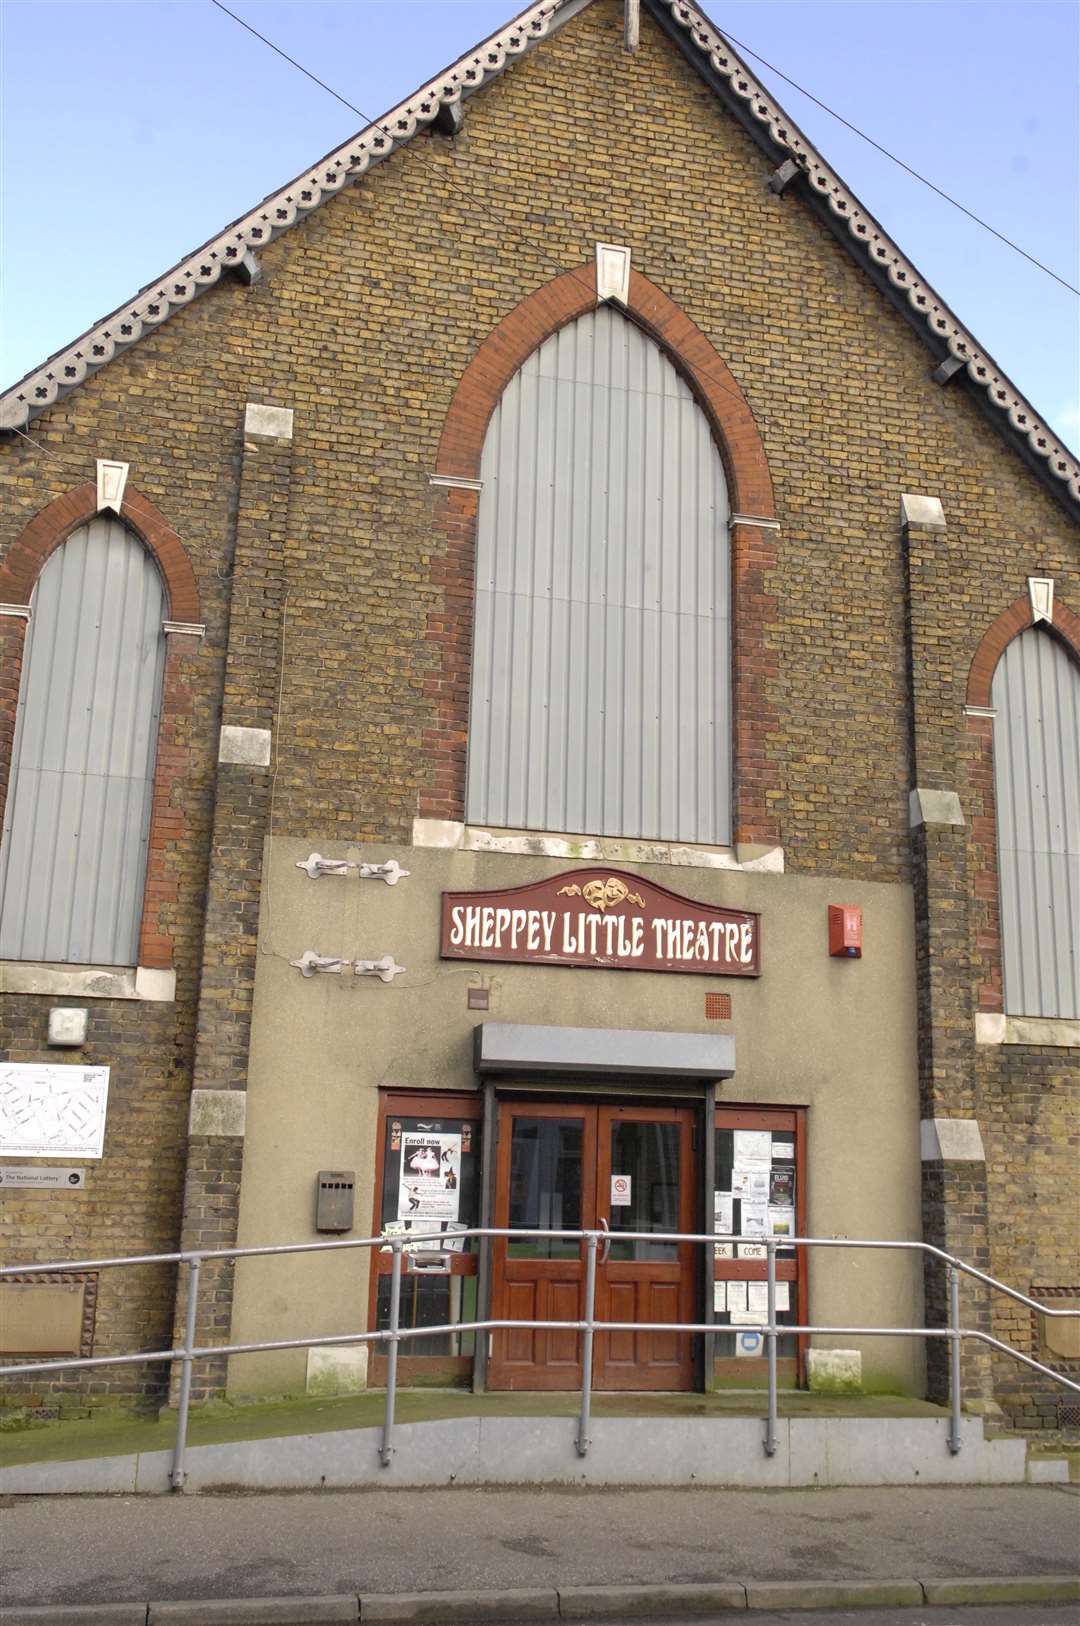 The Sheppey Little Theatre. Picture: Chris Davey FM3027040 (31884878)